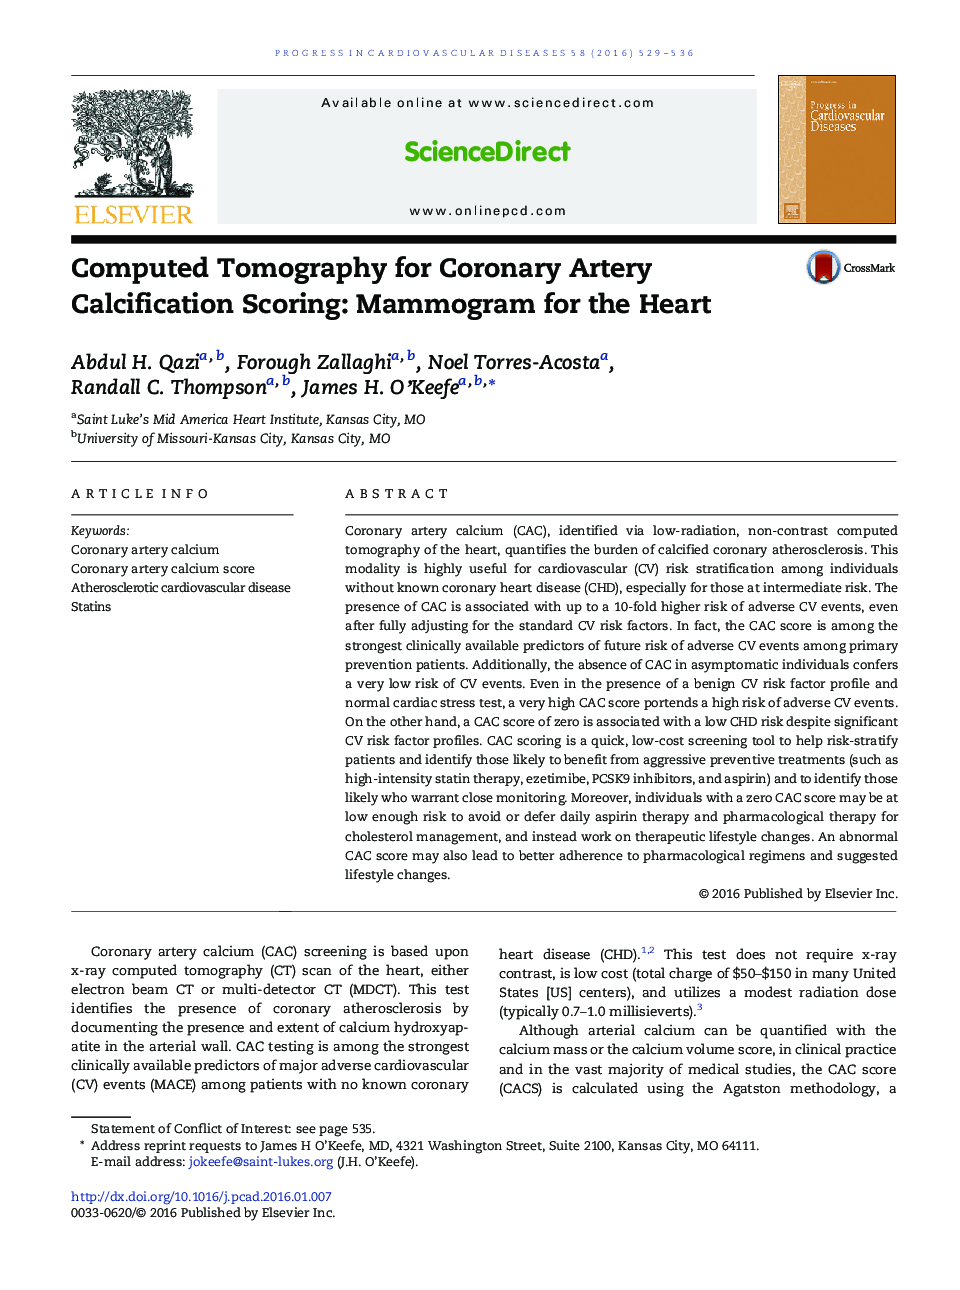 Computed Tomography for Coronary Artery Calcification Scoring: Mammogram for the Heart 